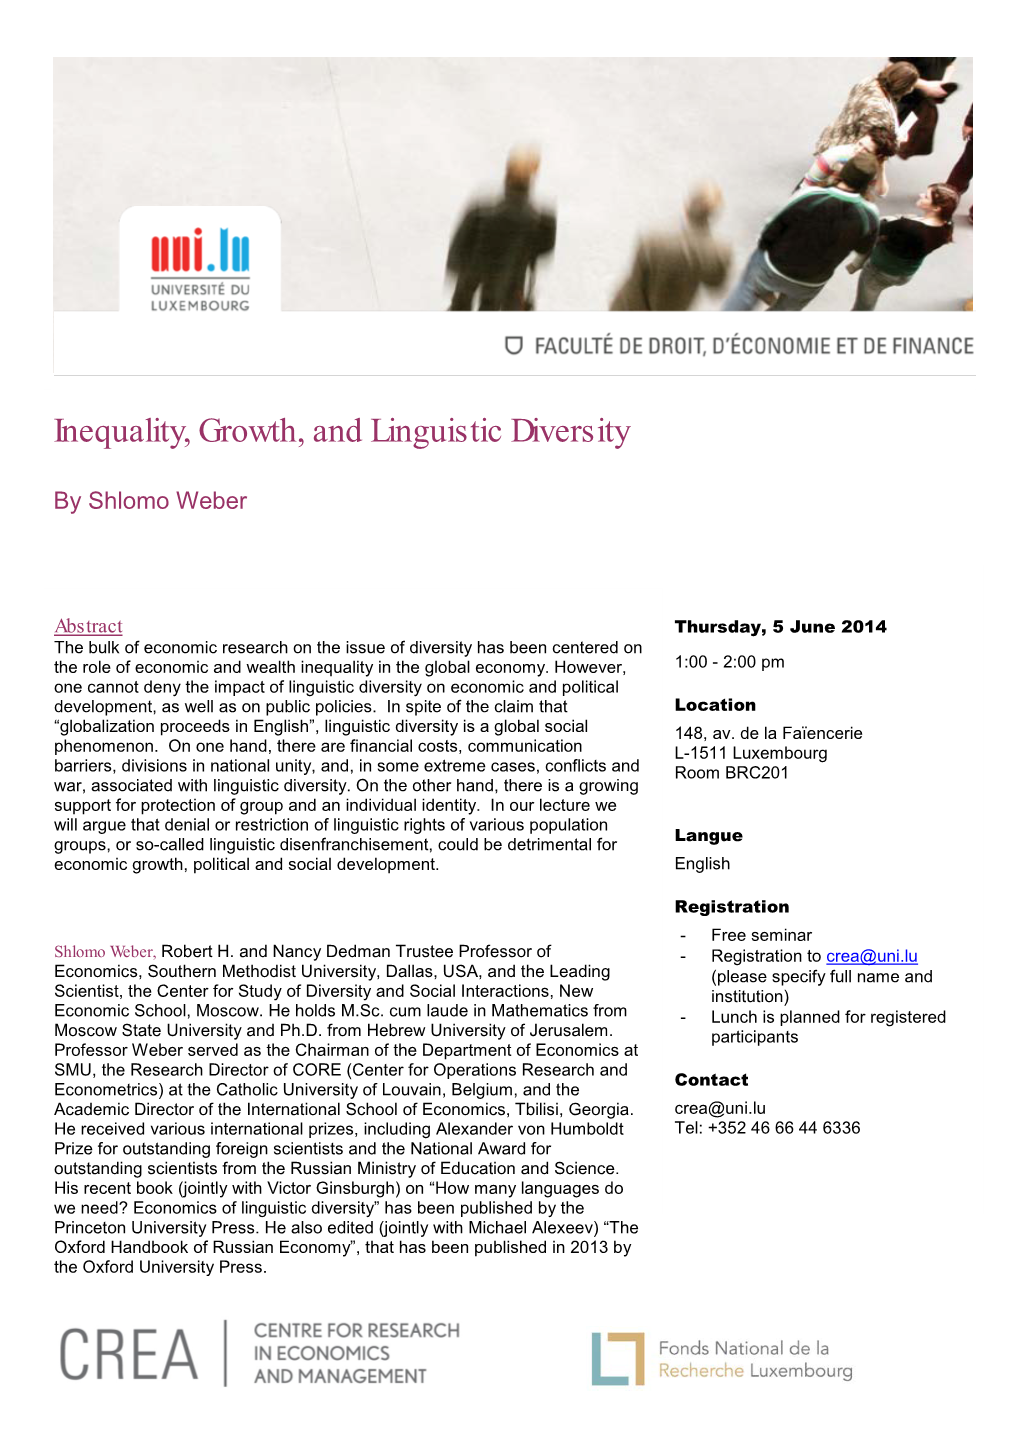 Inequality, Growth, and Linguistic Diversity